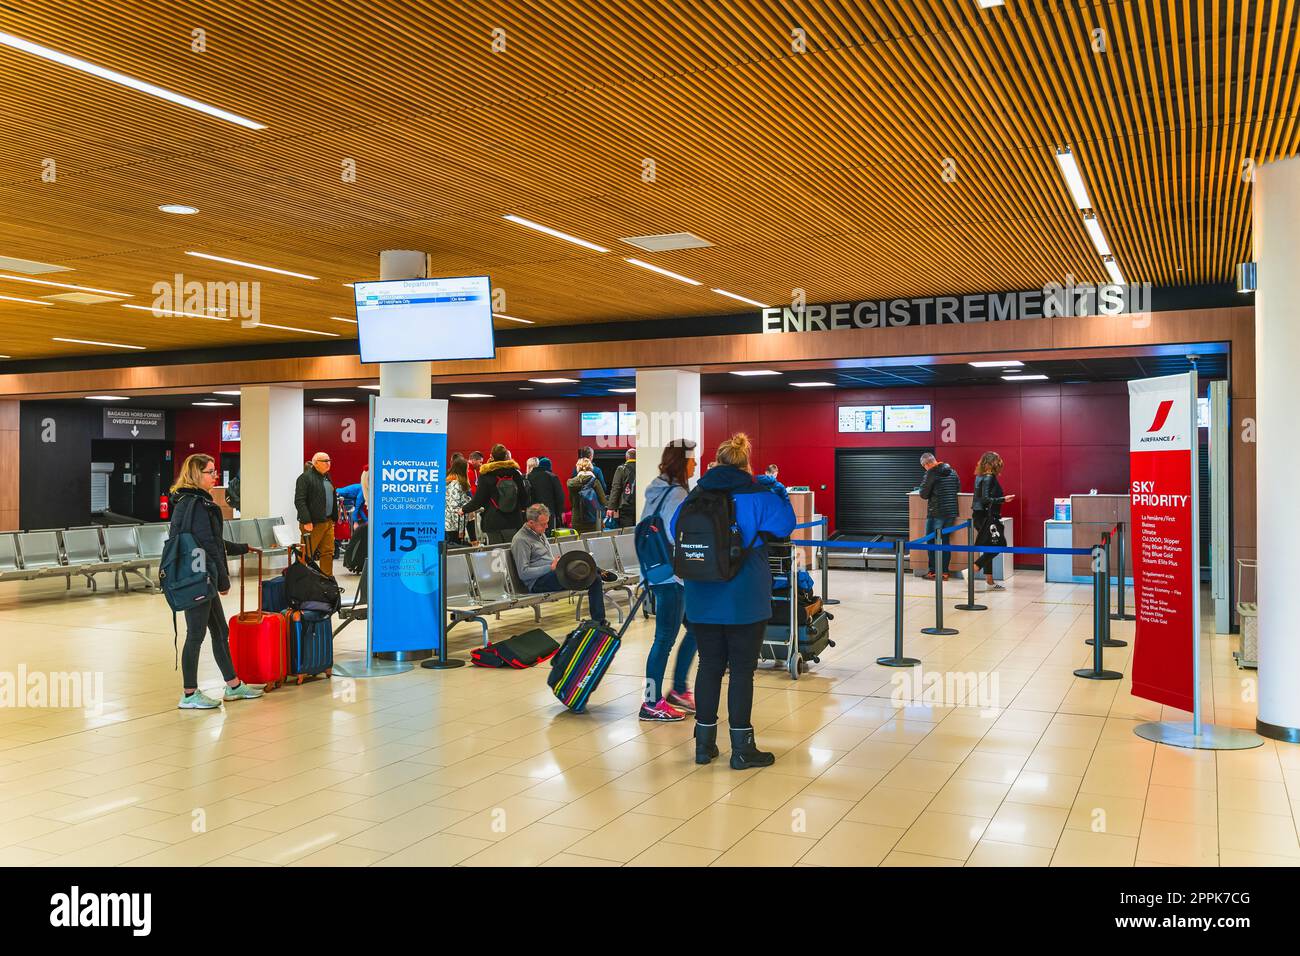 People standing with luggage in a queue for check in and flight departure, Perpignan airport Stock Photo